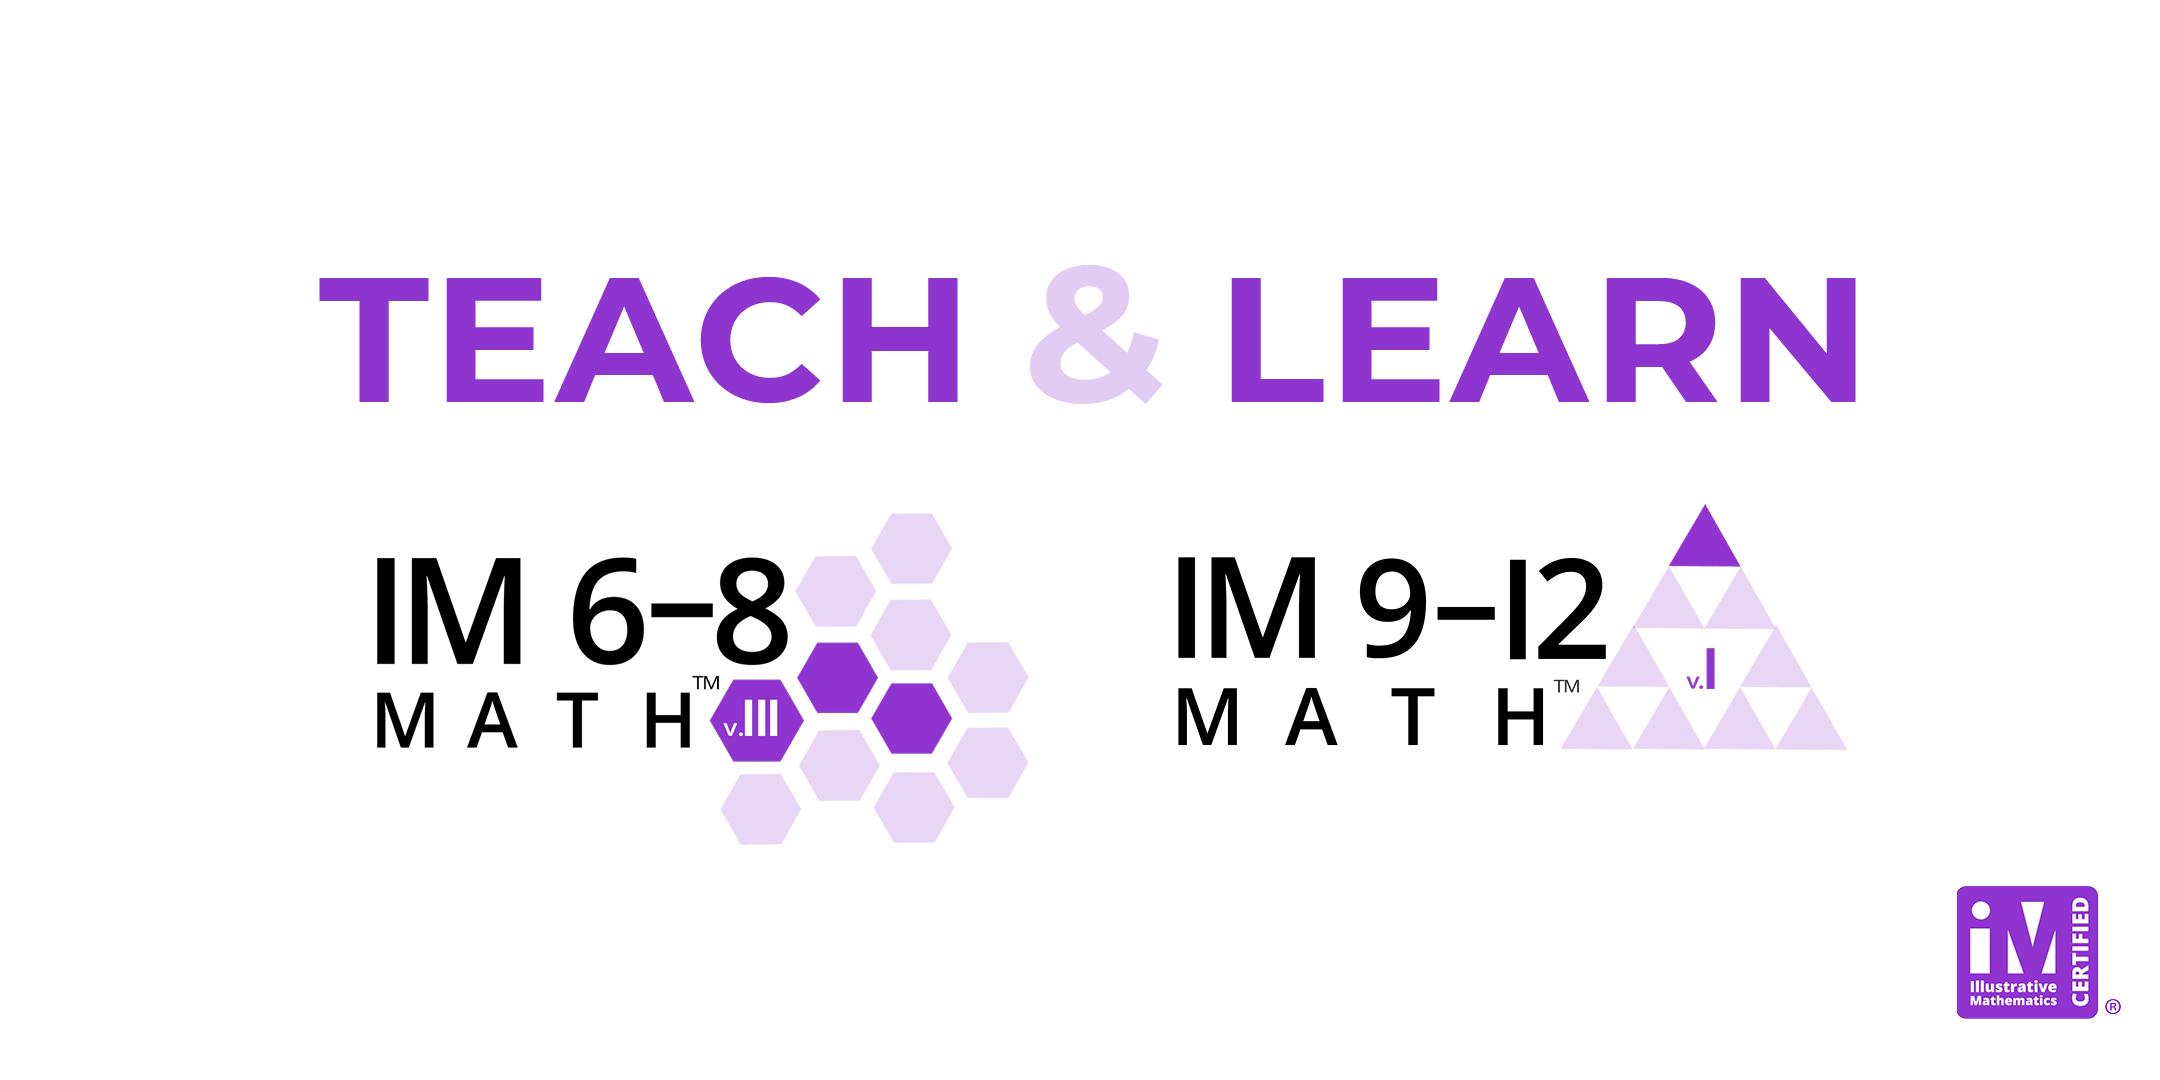 Gain first-hand experience with and confidence in using the IM Math curriculum at this two-day event led by an IM Certified facilitator.